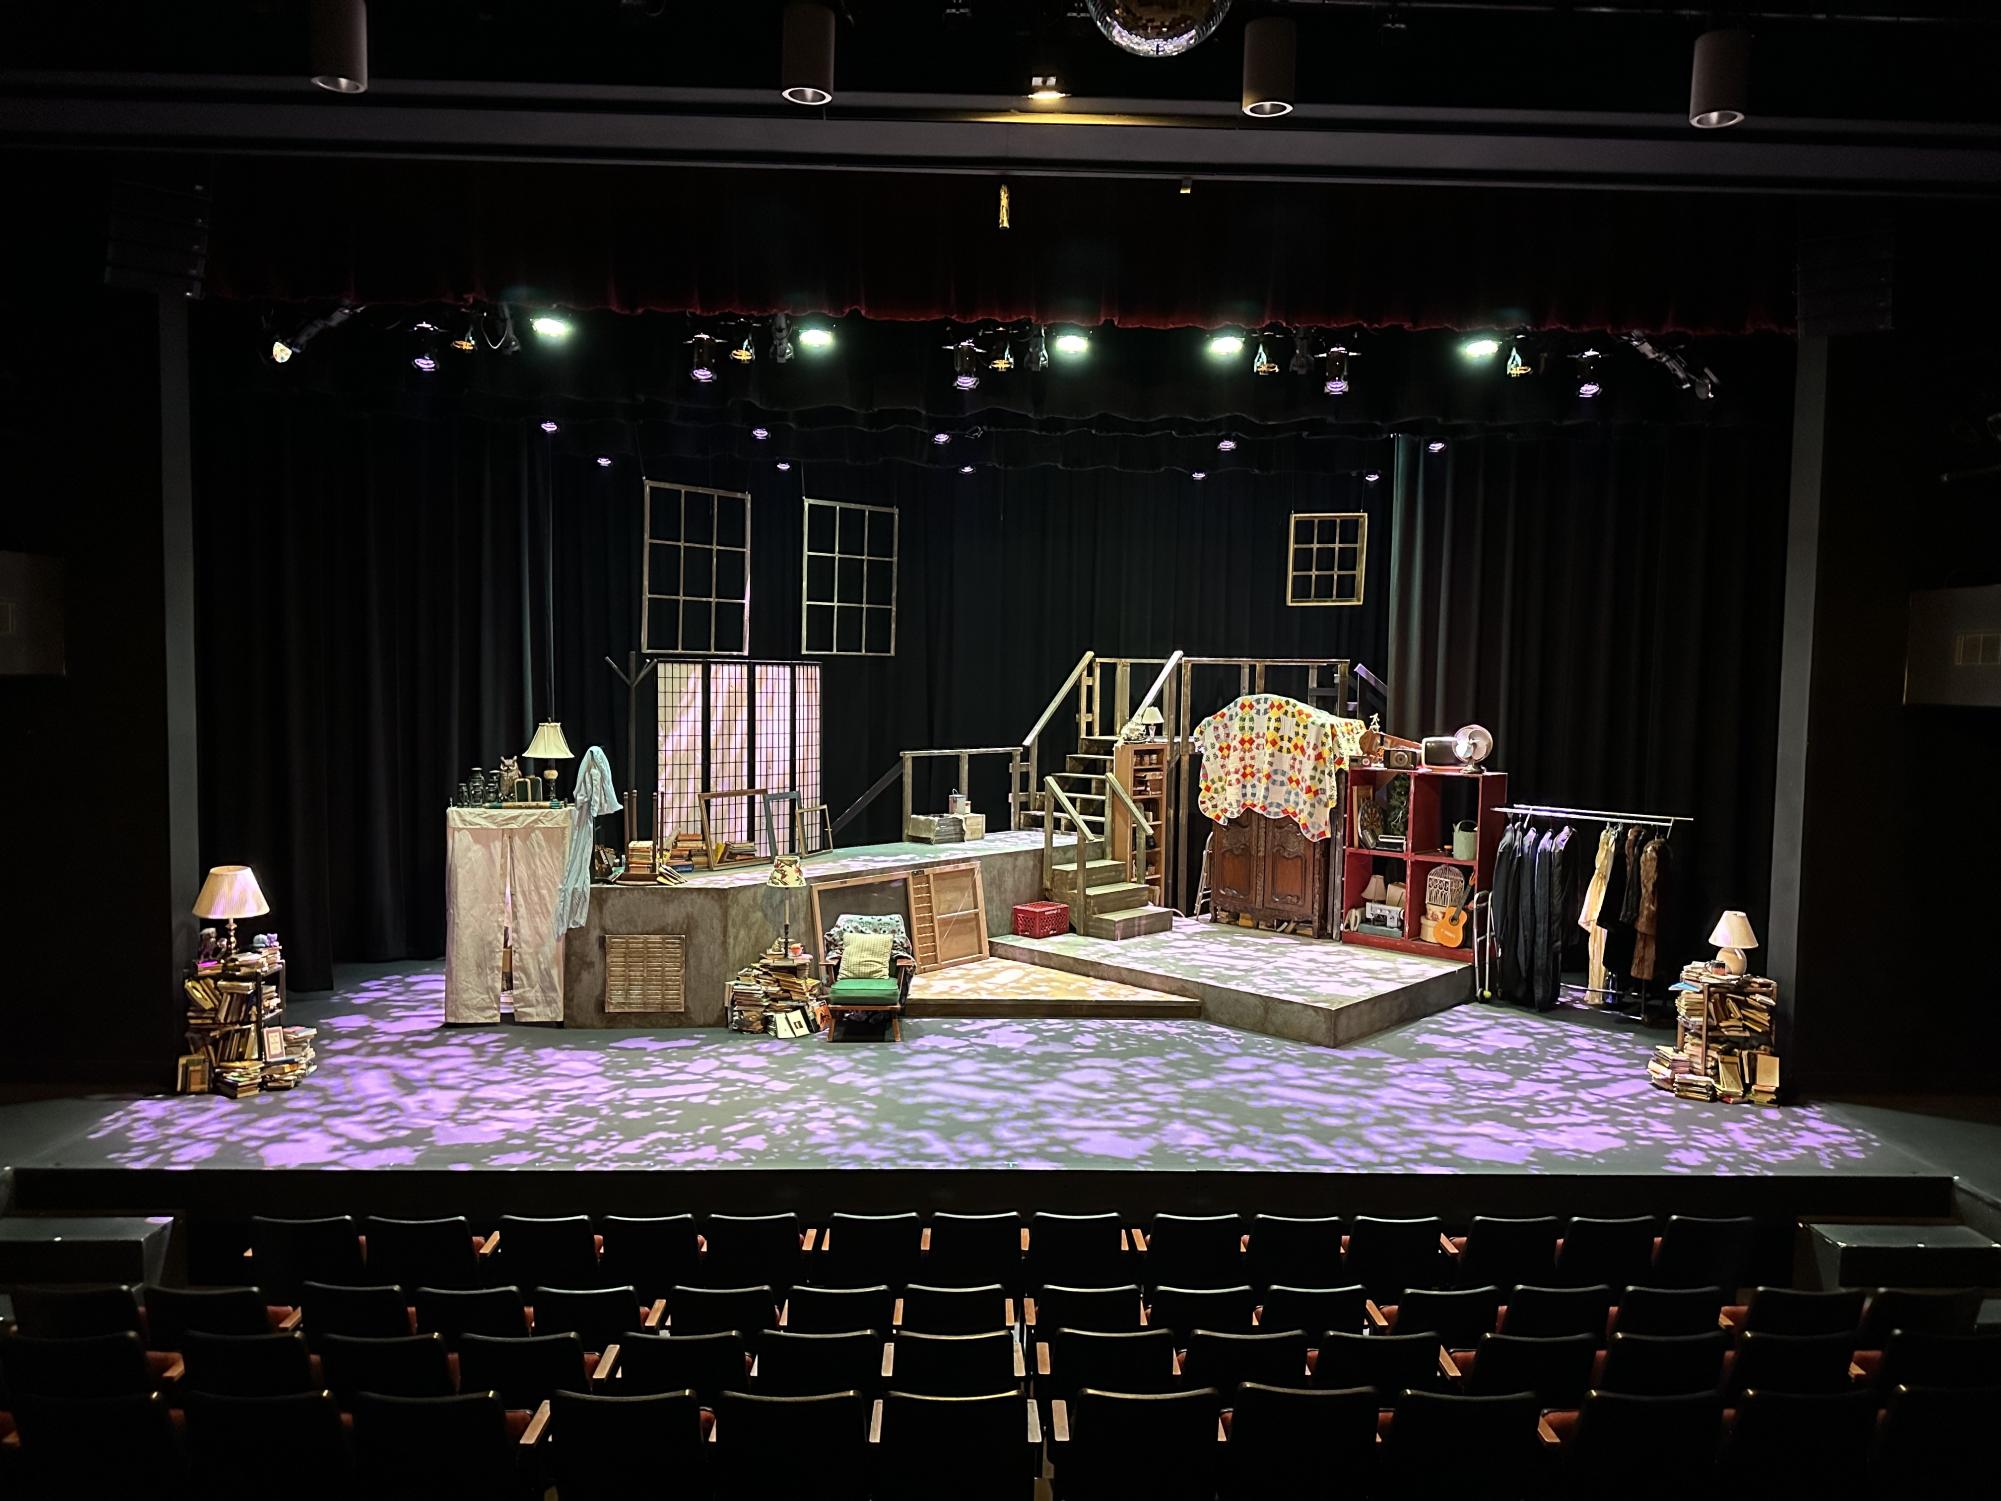 The set for The Secret in the Wings was created by Technical Theater & Design teacher Mr. Kyle Melton with the help of his students in ATP (Advanced Theater Production) and Technical Theater 1 & 2.